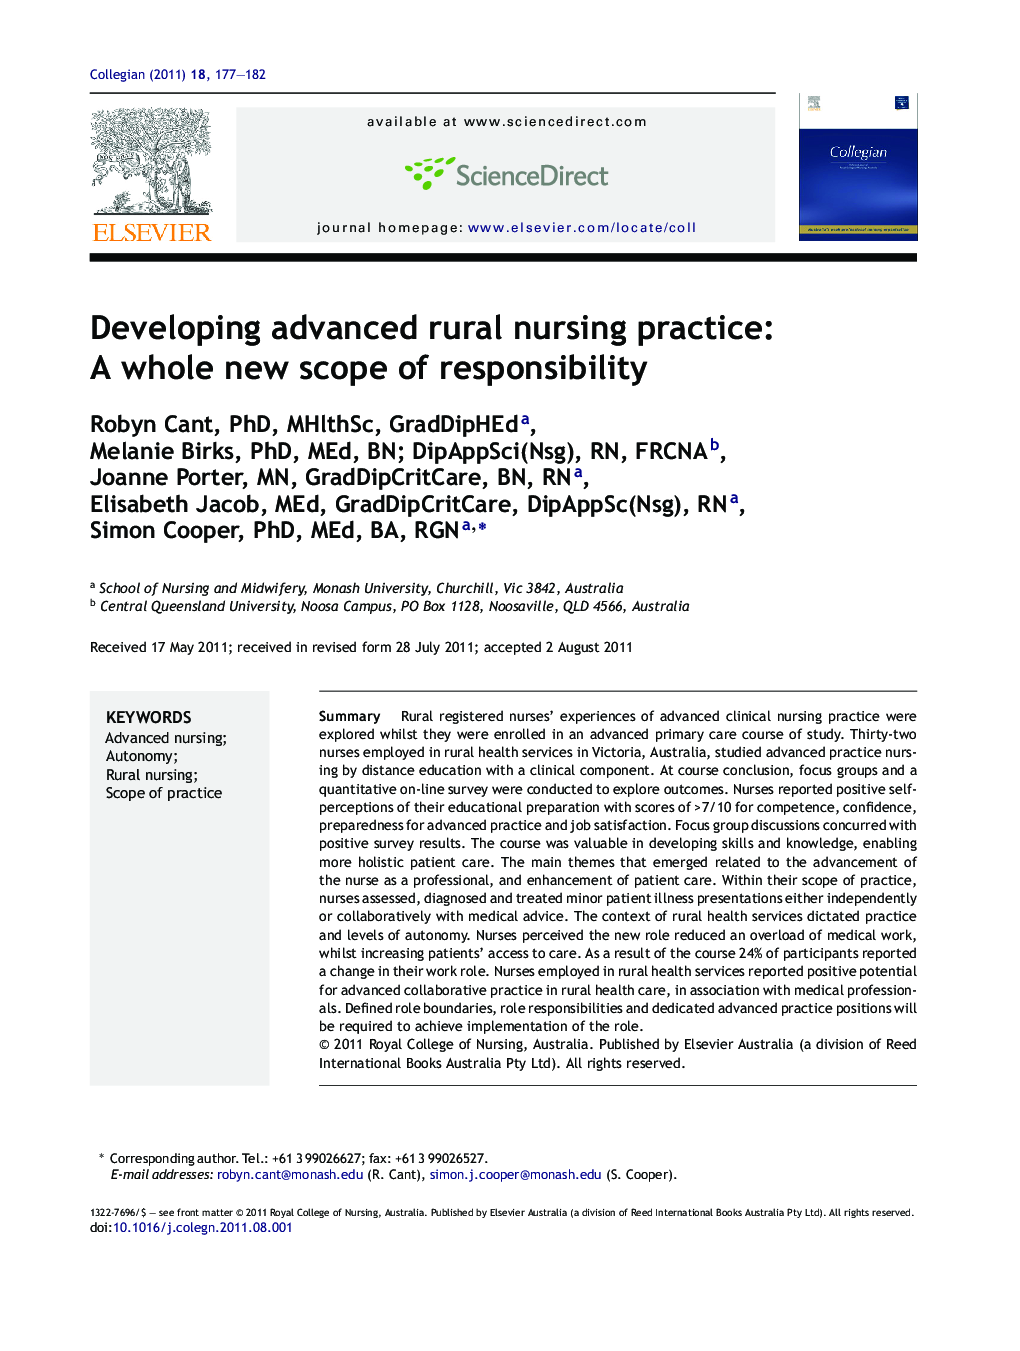 Developing advanced rural nursing practice: A whole new scope of responsibility